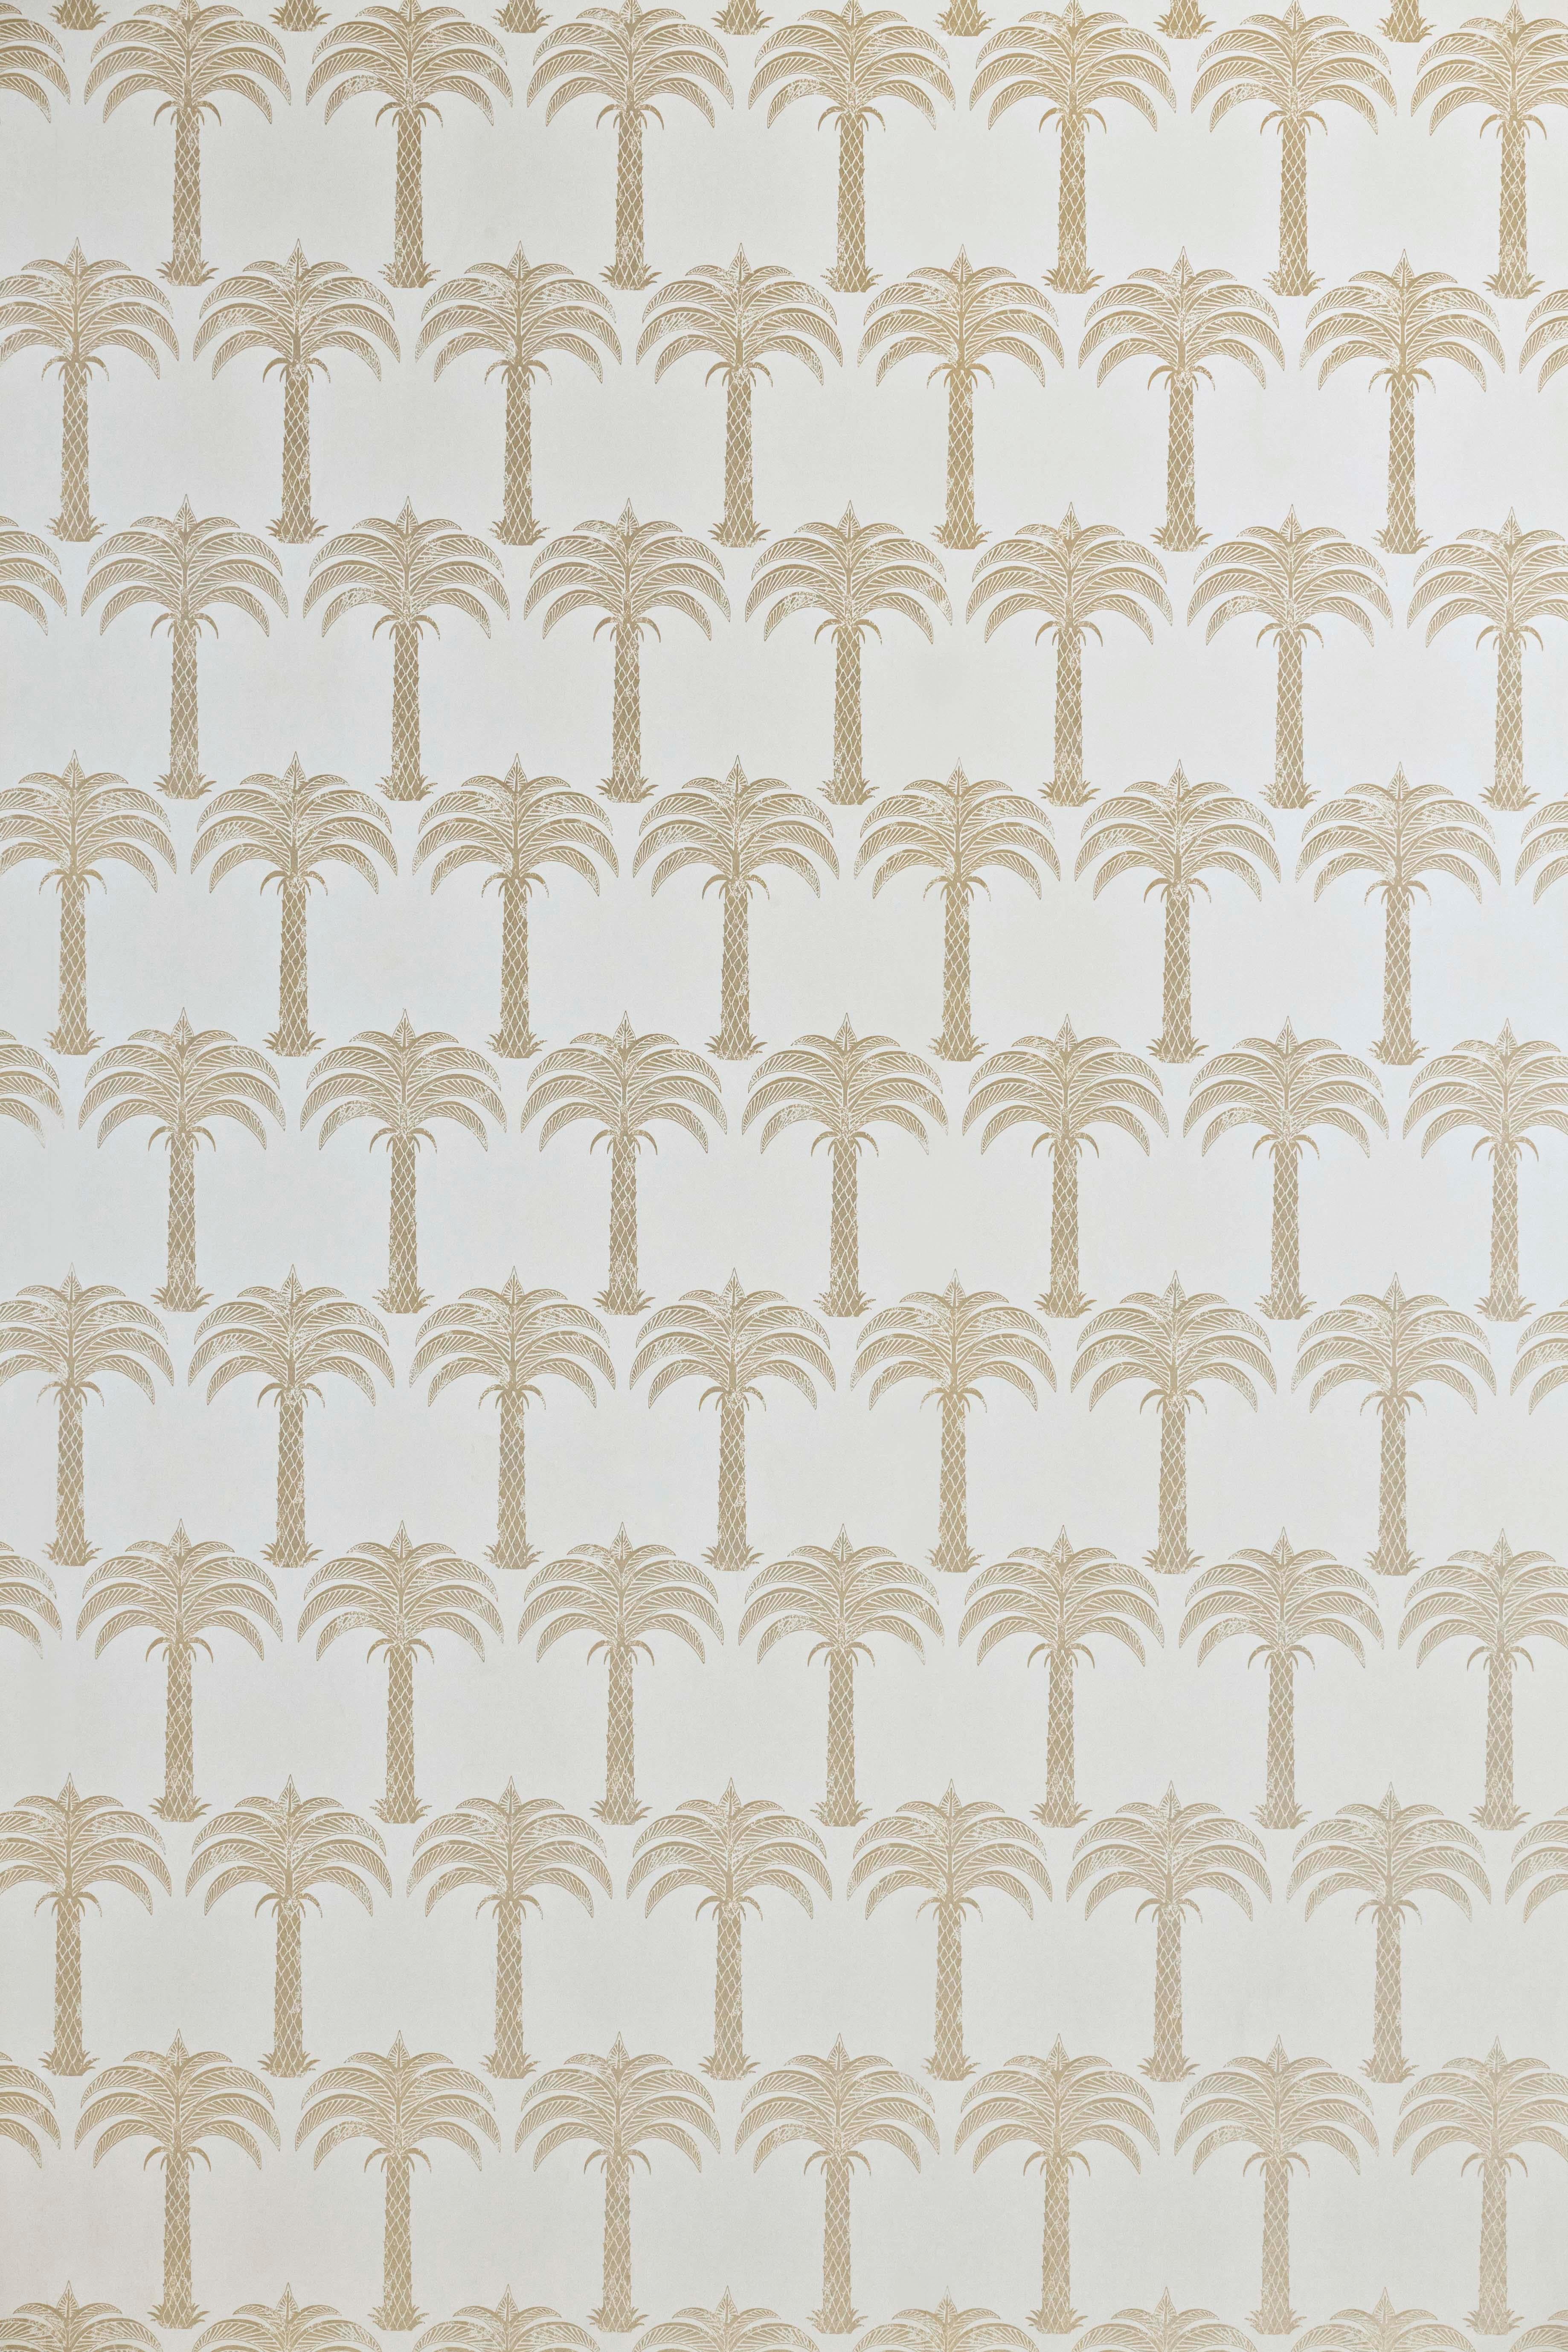 'Marrakech Palm' Contemporary, Traditional Wallpaper in Soft Gold In New Condition For Sale In Pewsey, Wiltshire